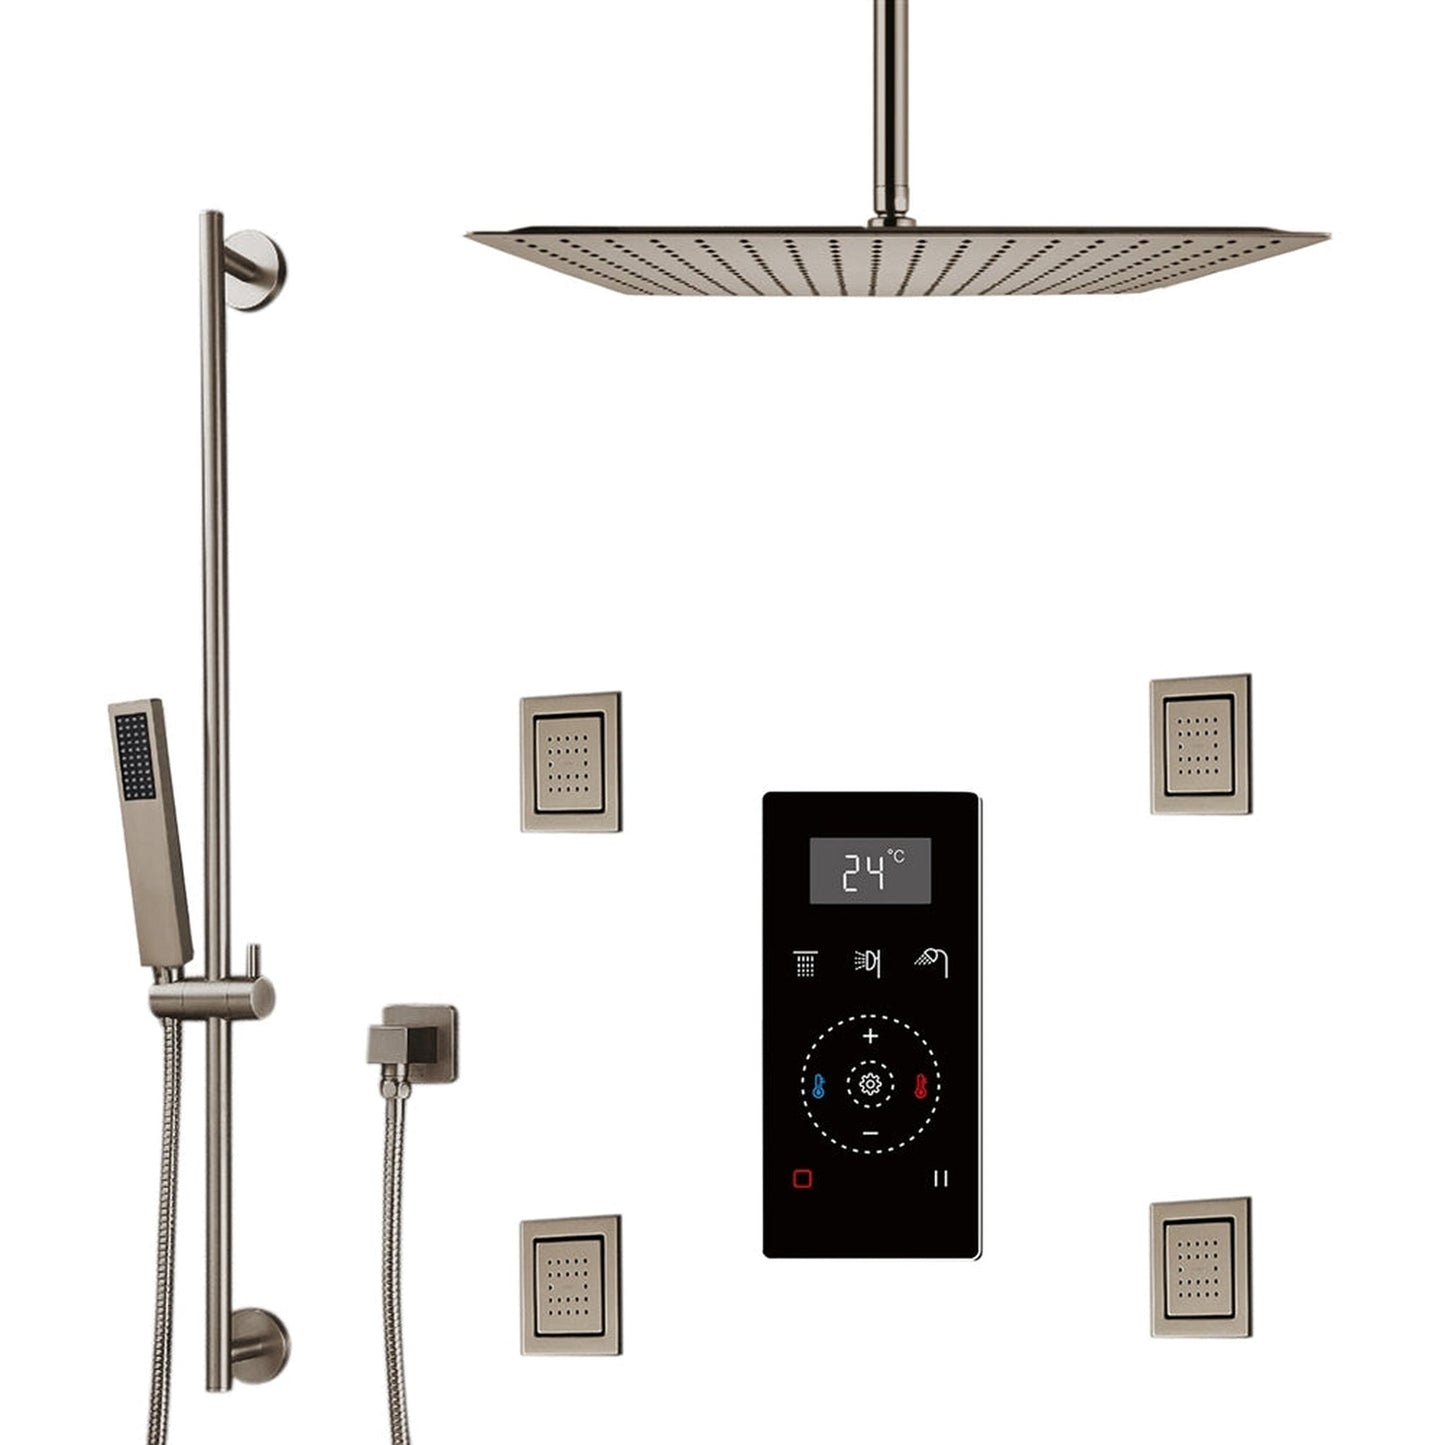 Fontana 24" Brushed Nickel Ceiling Mounted Rainfall Digital Control Shower System With 4-Jet Body Sprays, Hand Shower and Water Powered LED Lights